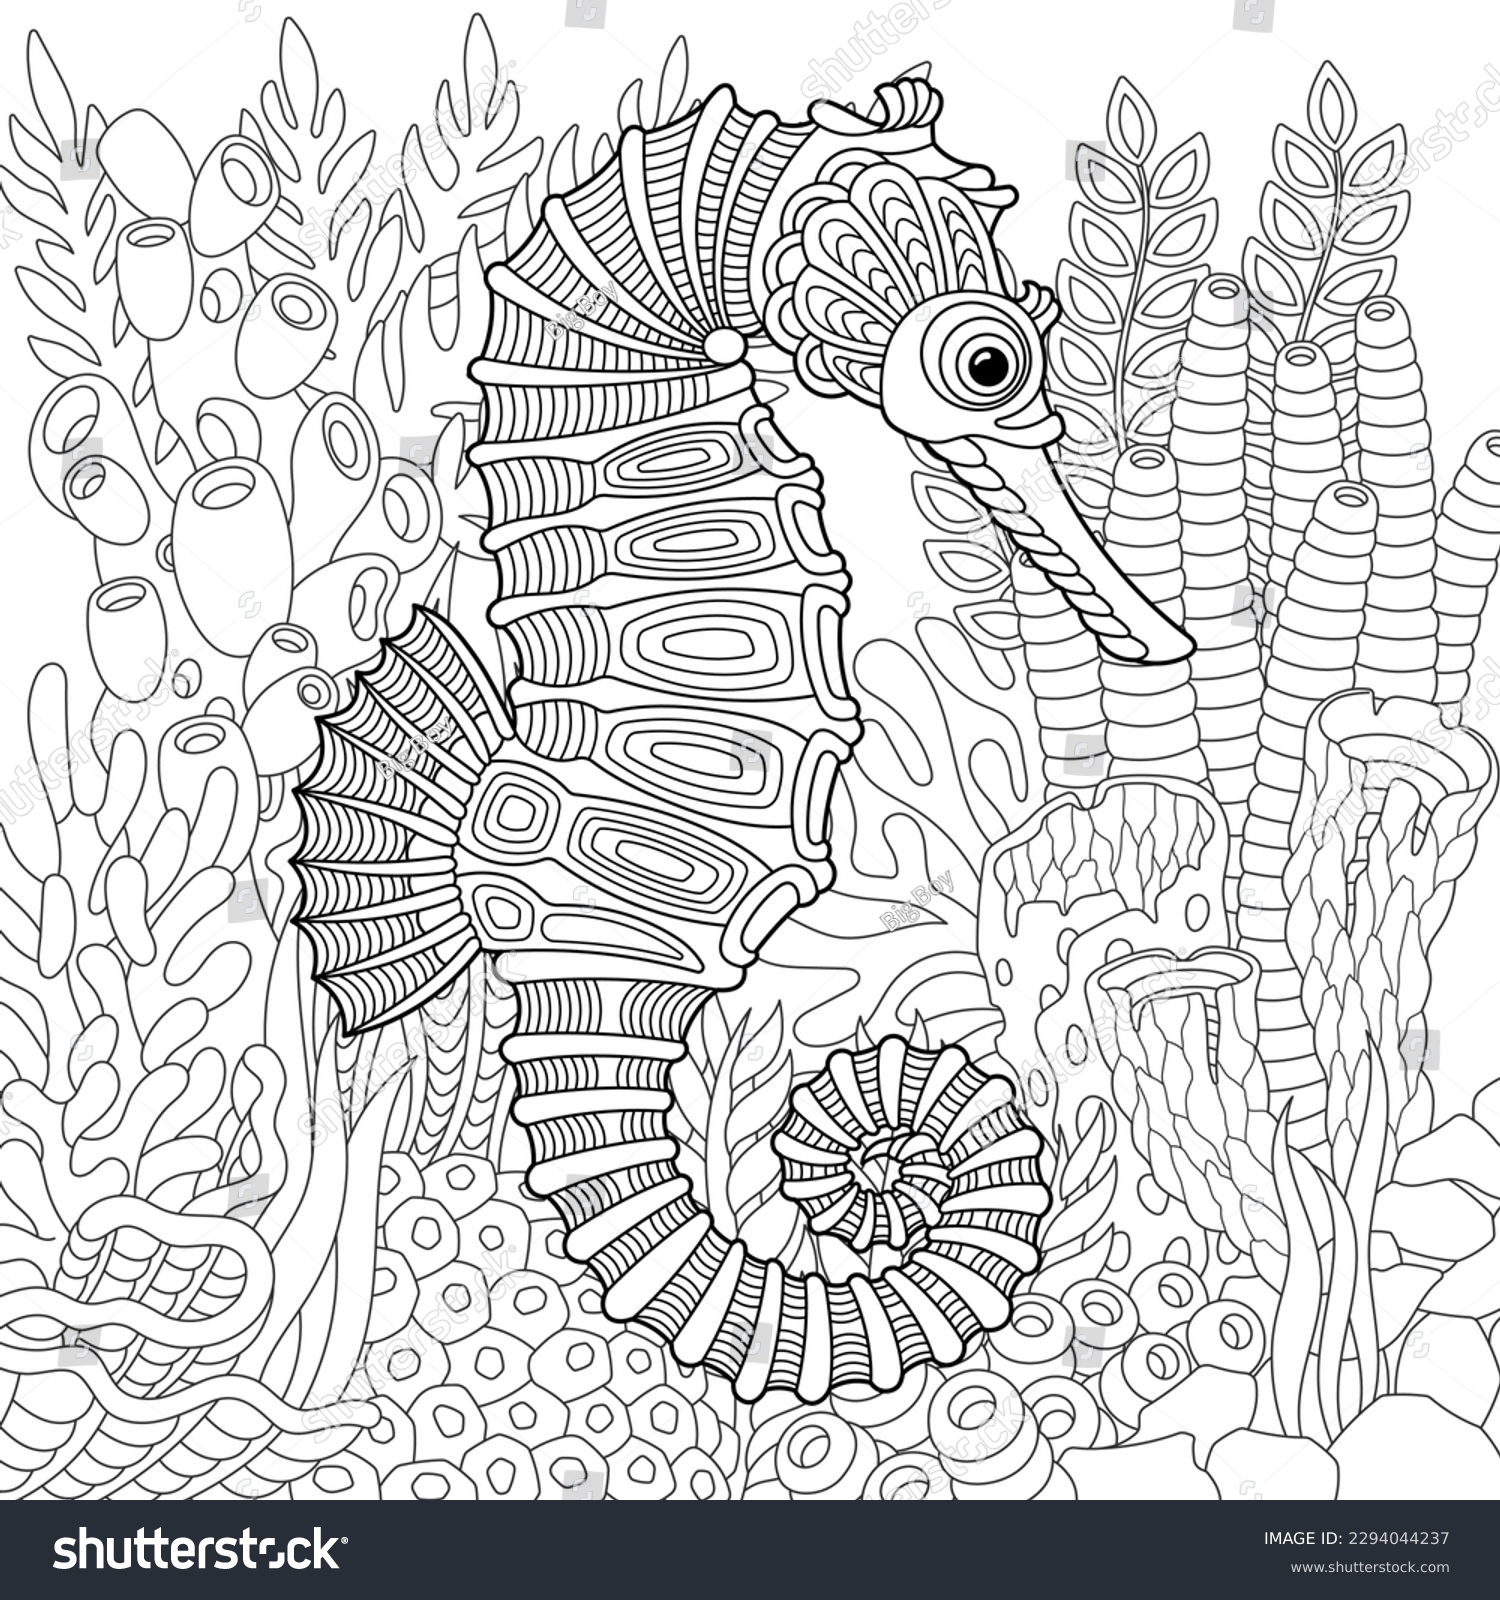 Seahorse adult coloring book images stock photos d objects vectors